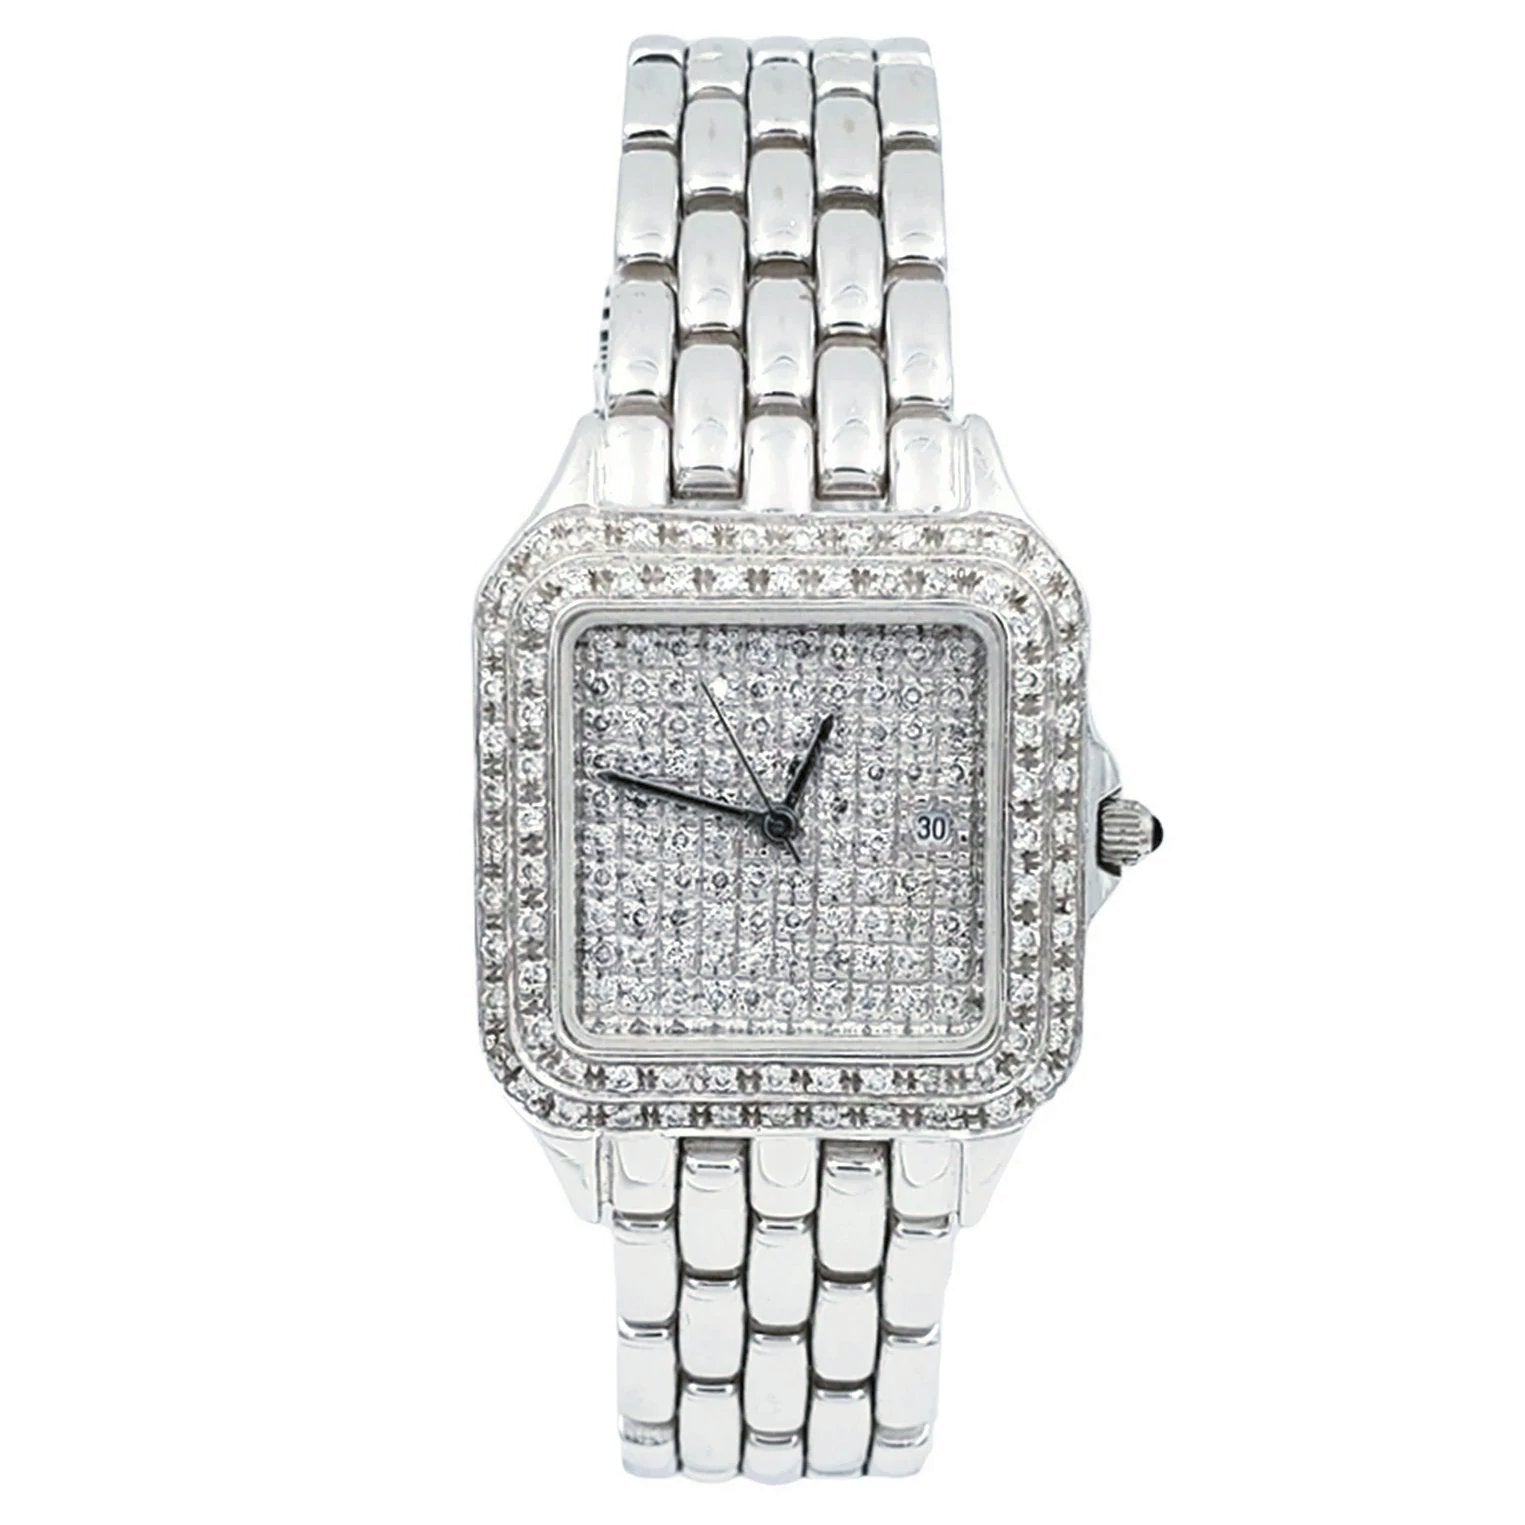 Unisex Geneve 14K White Gold Watch with Diamond Dial and Diamond Bezel. (Pre-Owned)